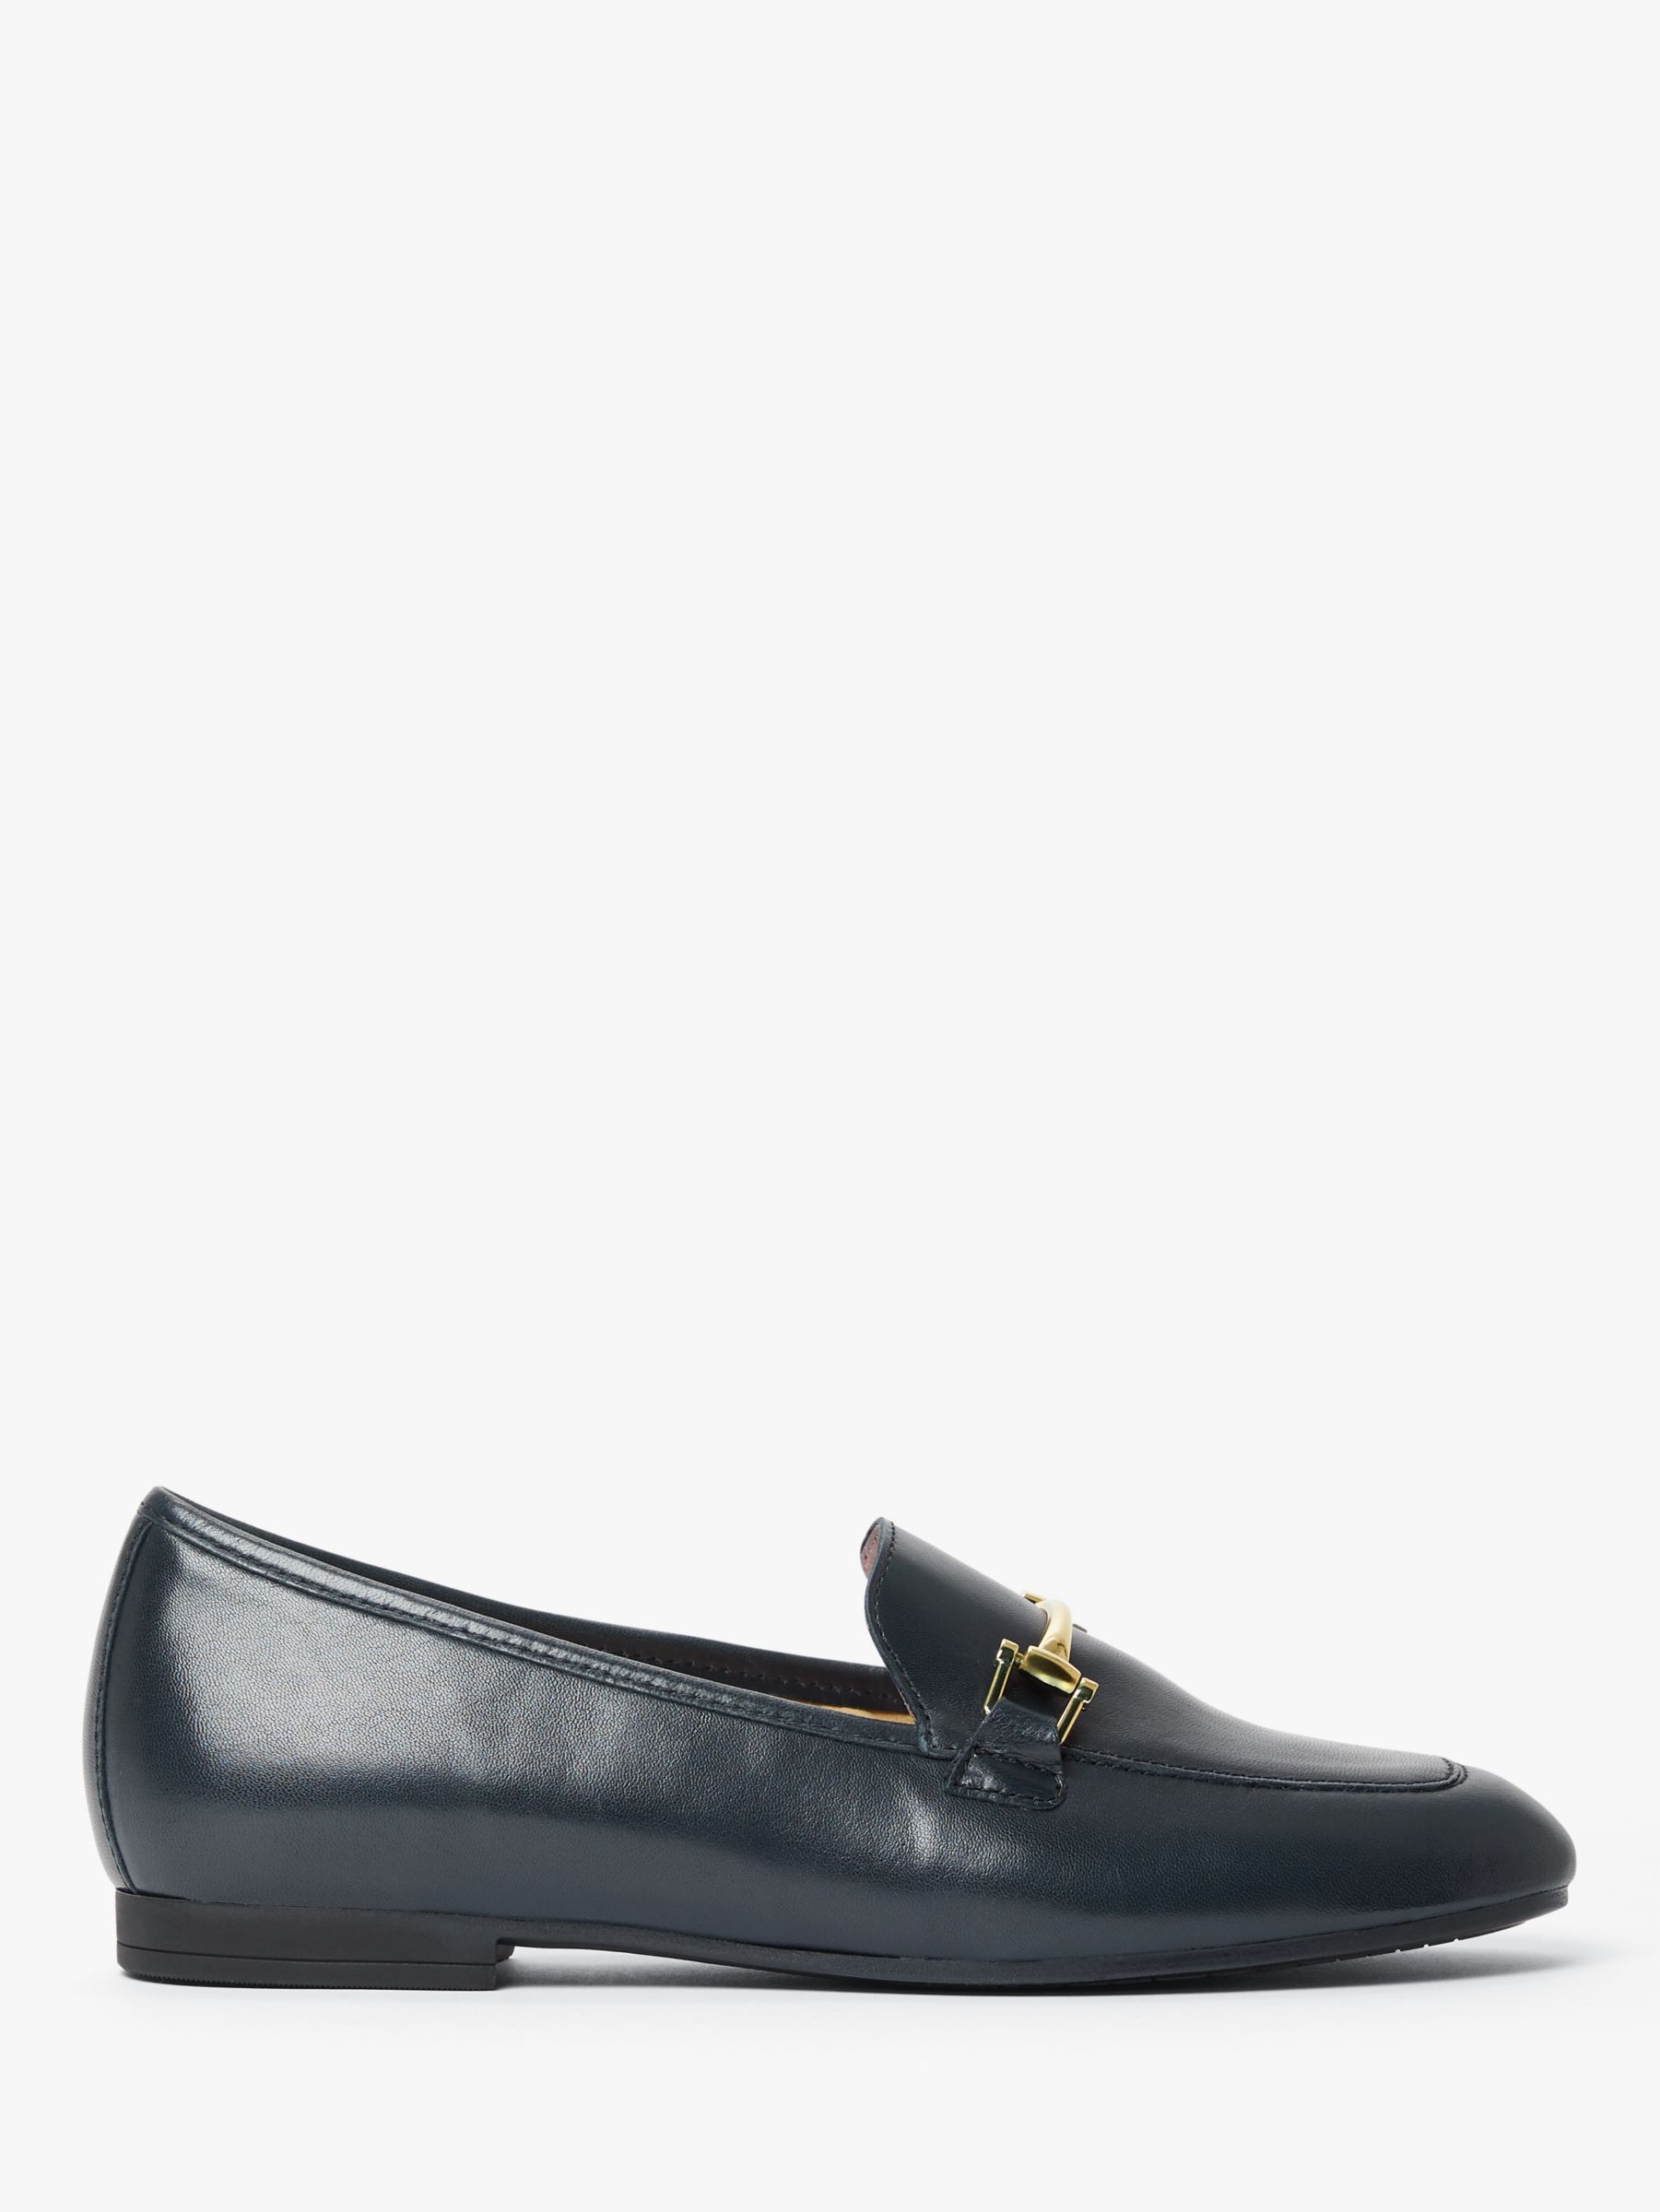 Gabor Serin Leather Gold Trim Loafers, Navy at John Lewis & Partners